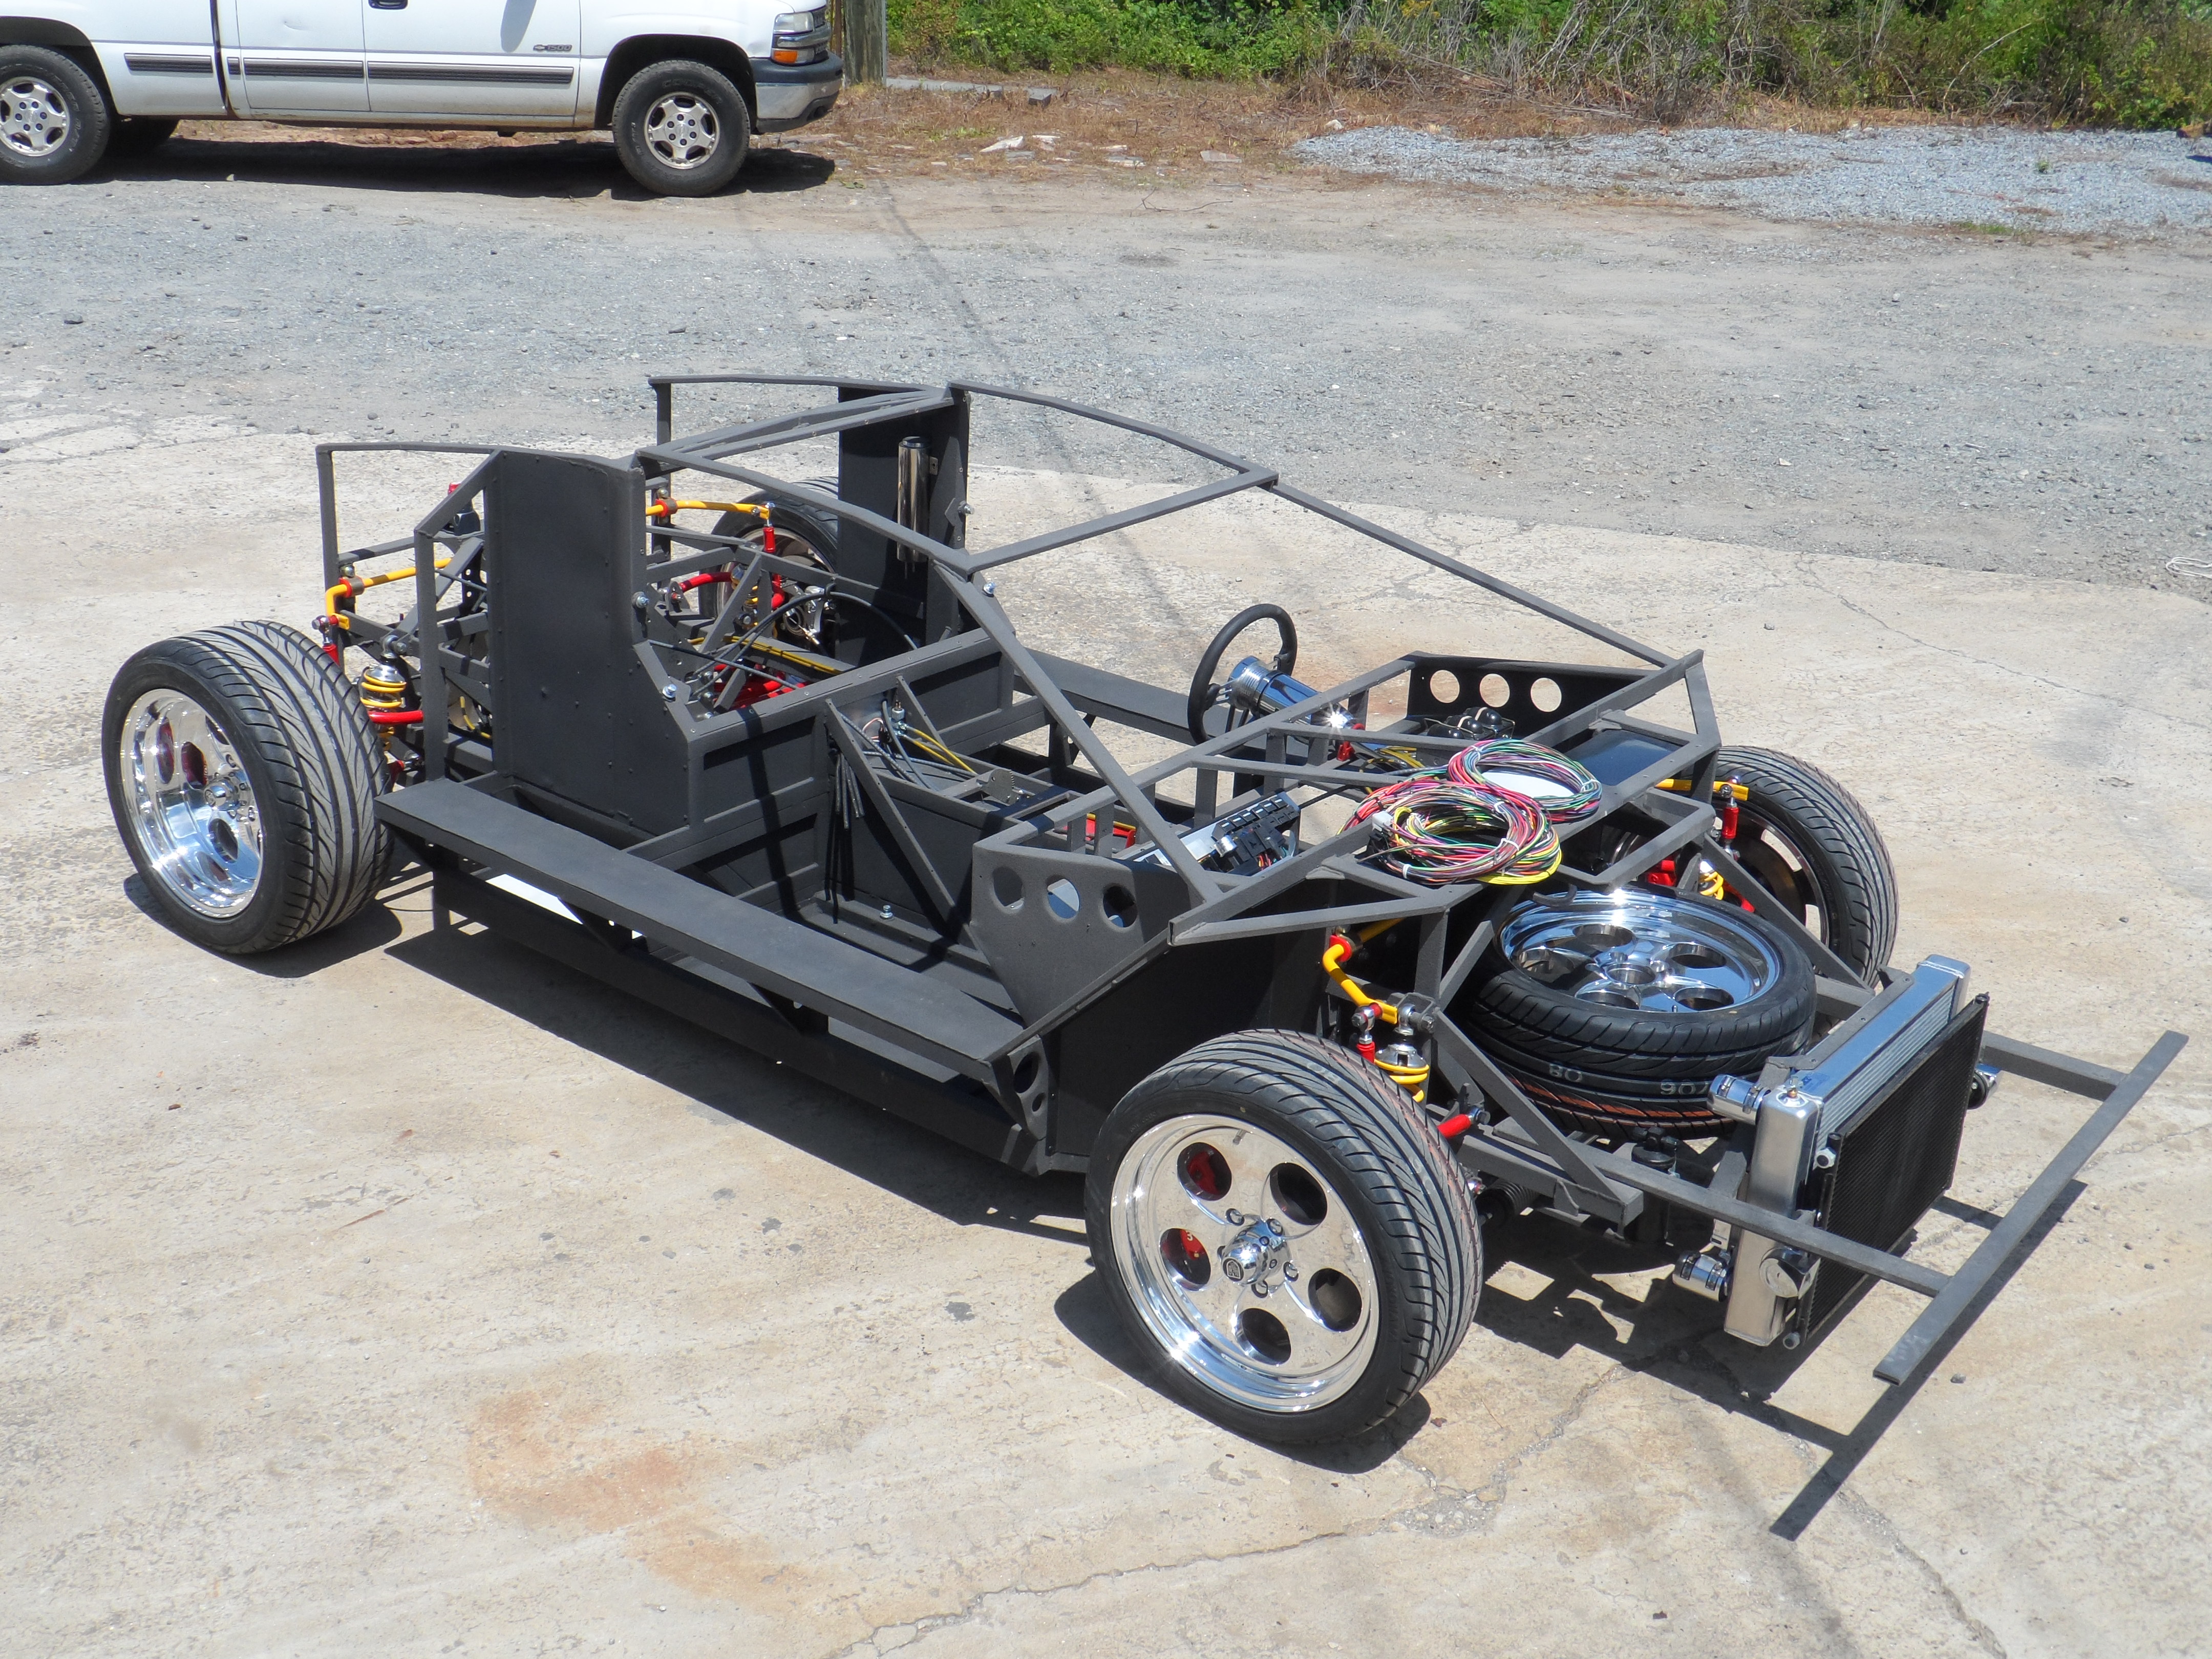 Chassis Photos